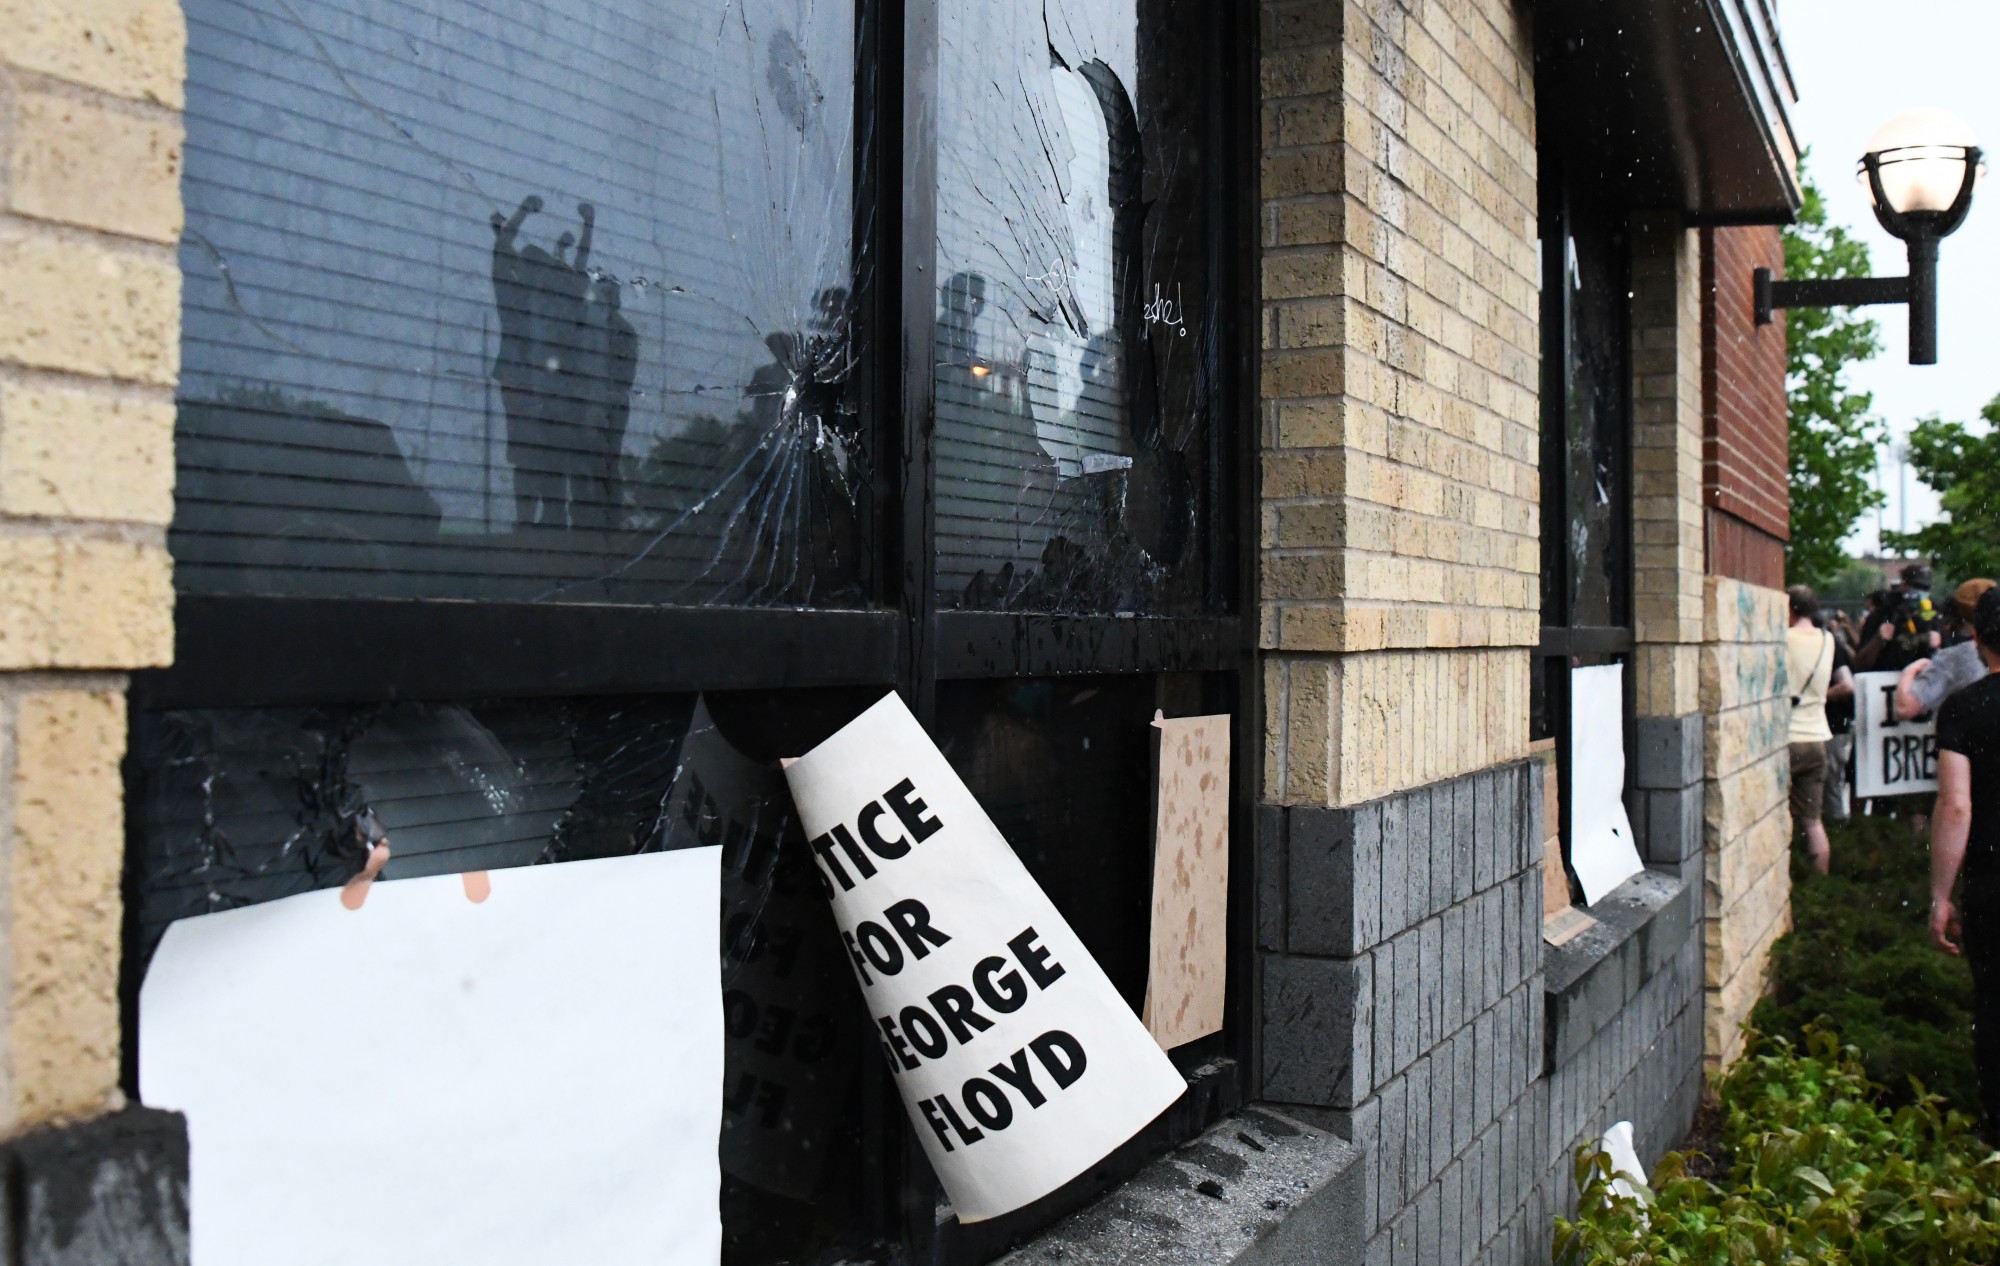 A sign reading “Justice for George Floyd” is taped to a window that was broken by protesters at the Minneapolis 3rd Police Precinct on Minnehaha Ave on Tuesday, May 26. The protest was in response to the death of George Floyd in police custody. (Andy Kosier / Minnesota Daily)